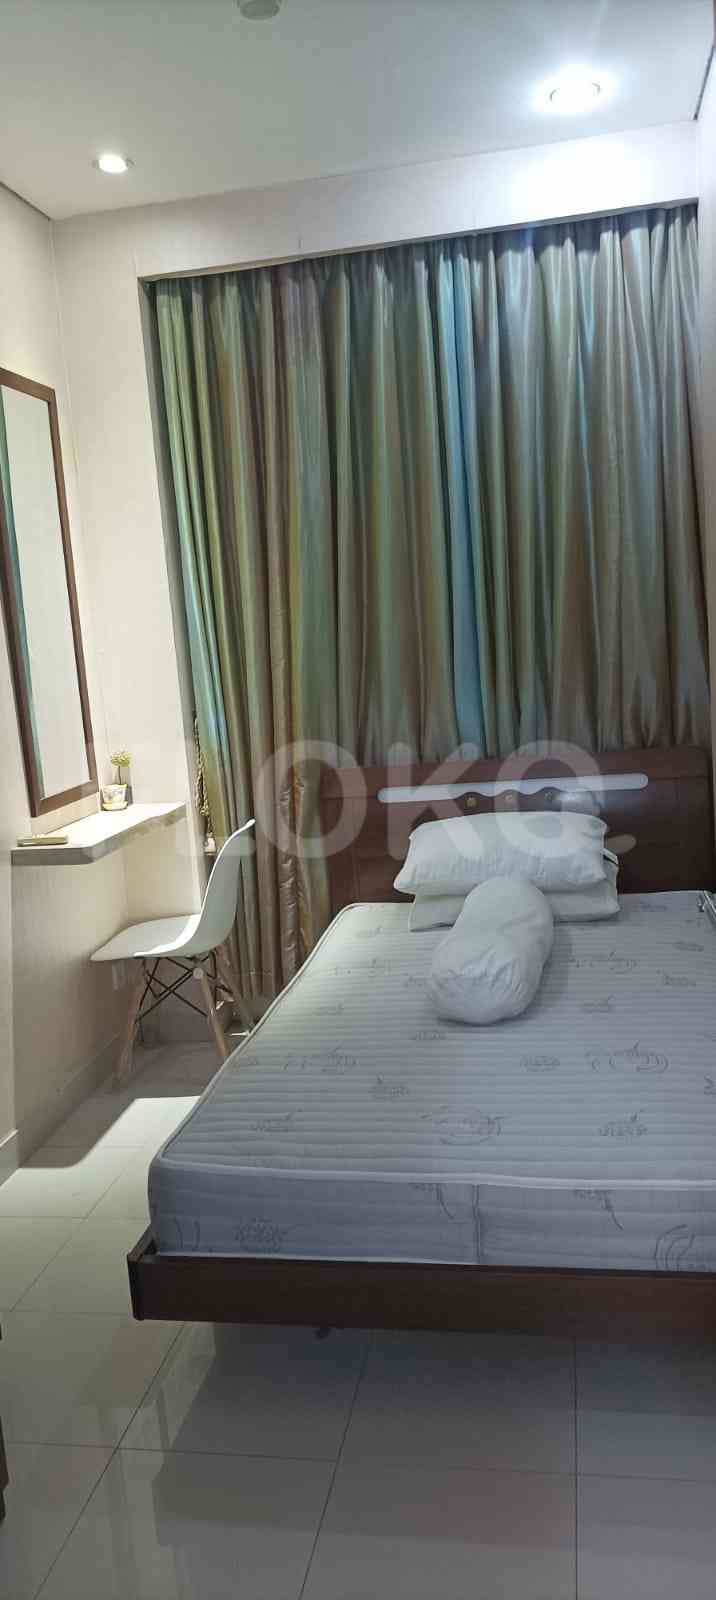 2 Bedroom on 2nd Floor for Rent in Kuningan Place Apartment - fku966 4